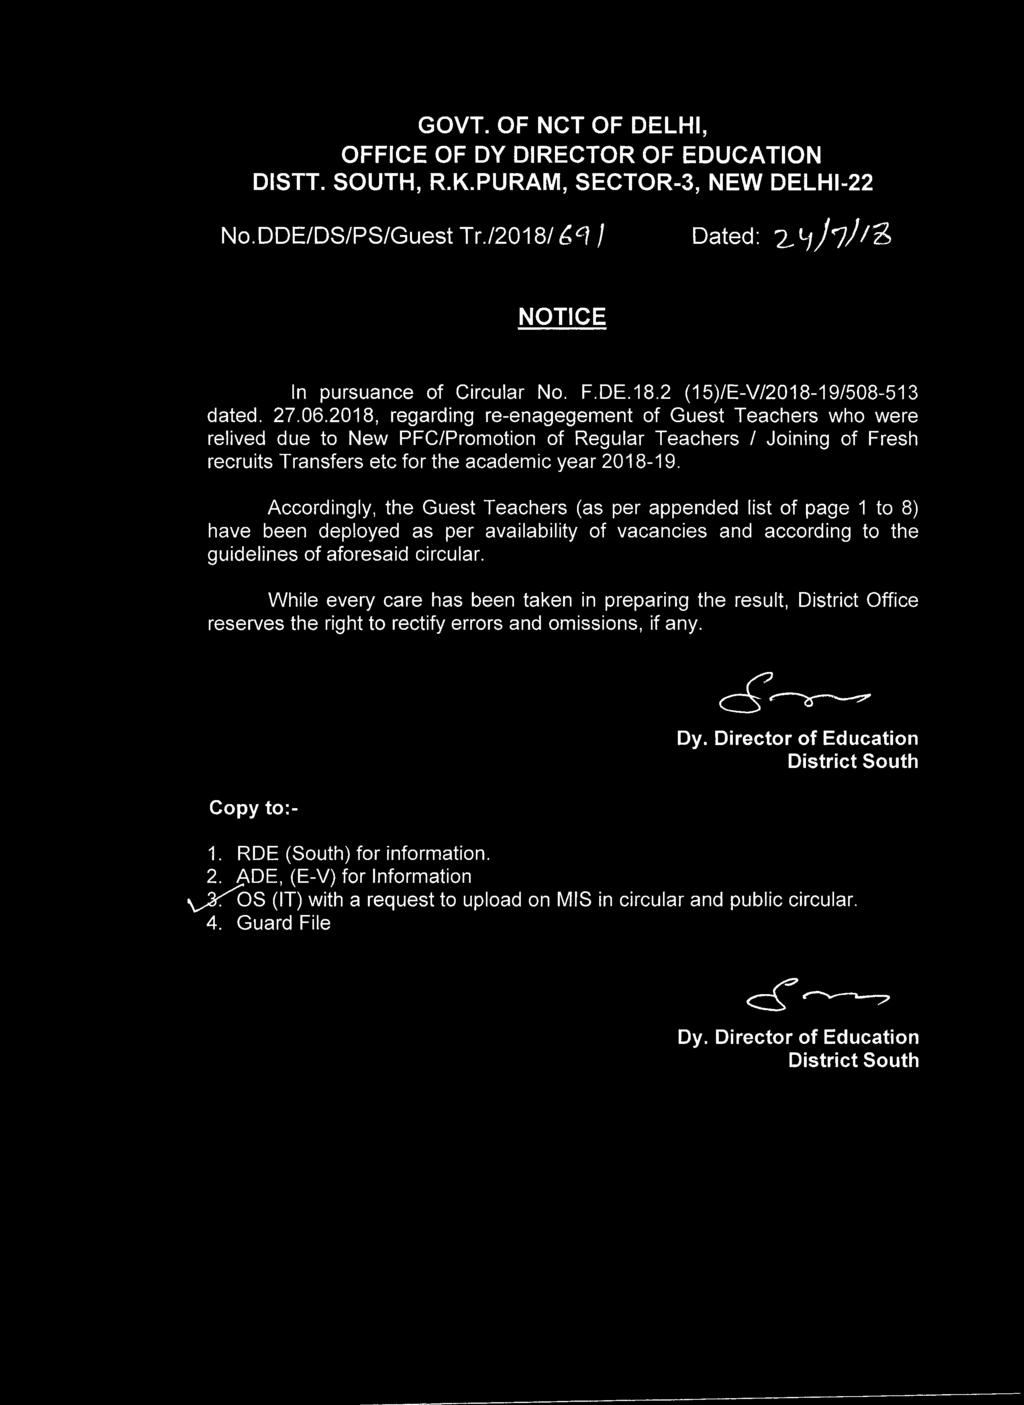 Accordingly, the Guest Teachers (as per appended list of page 1 to 8) have been deployed as per availability of vacancies and according to the guidelines of aforesaid circular.